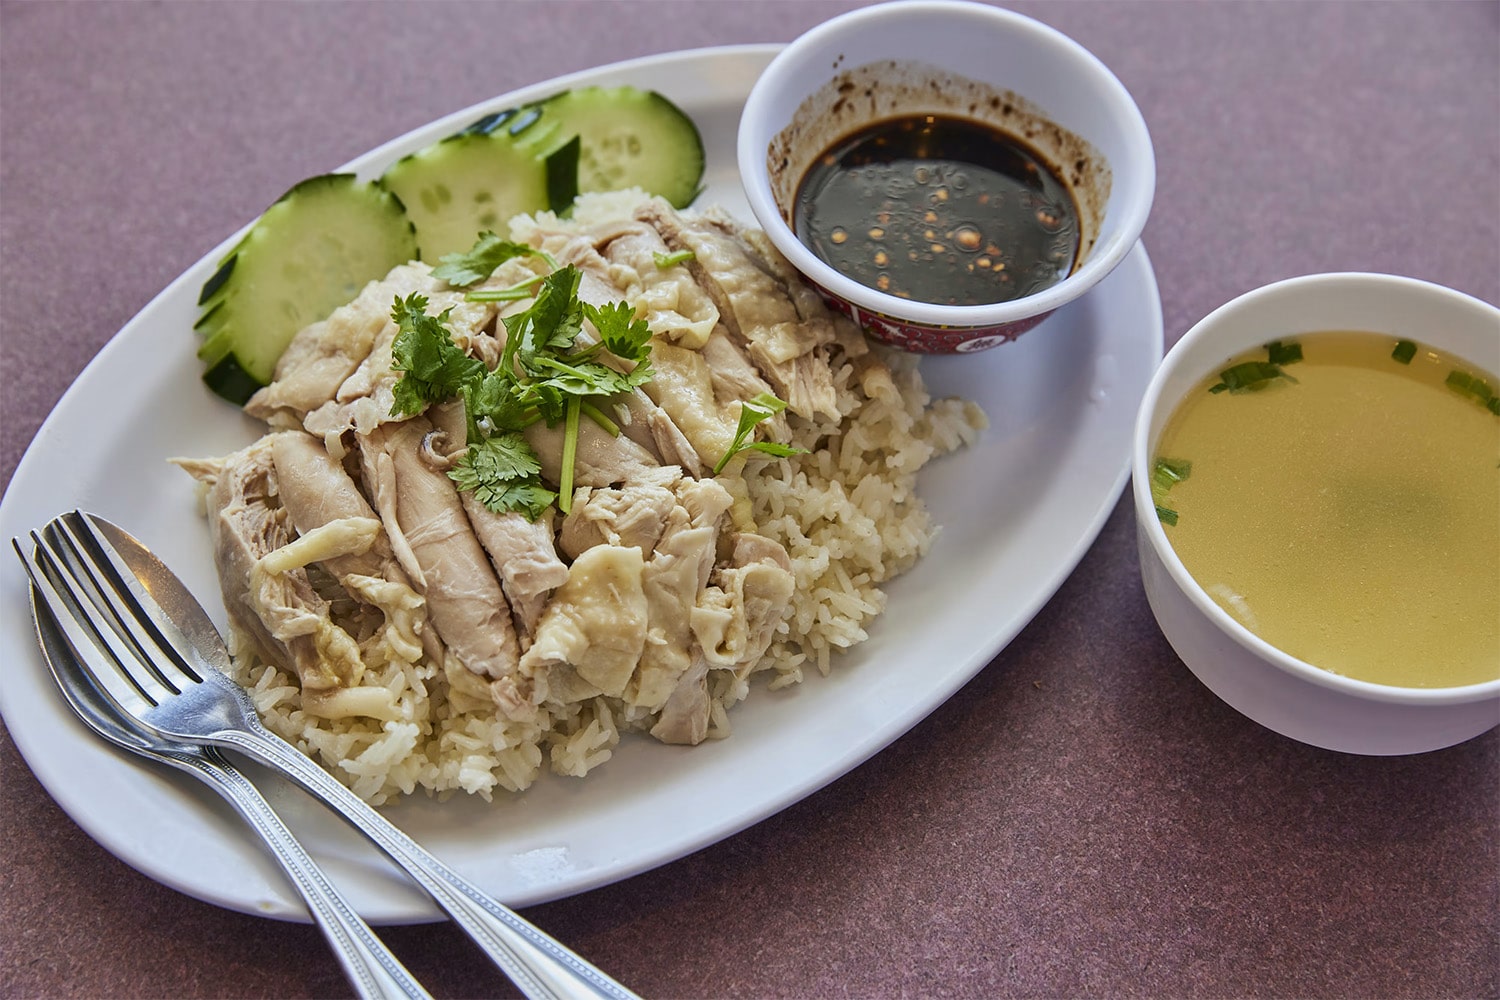 32 interesting facts about Hainanese chicken rice